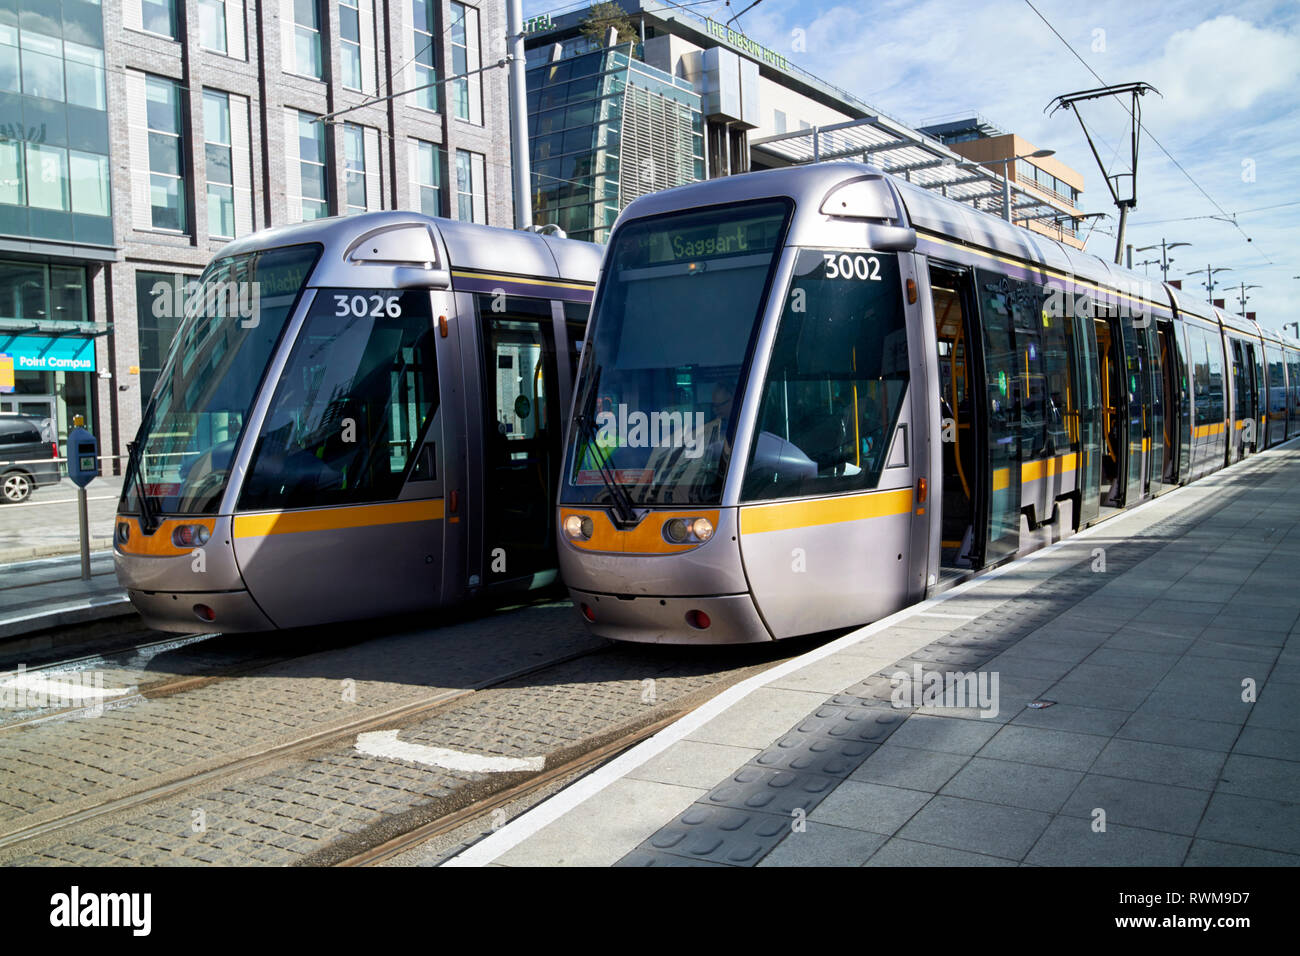 Luas dublins light rail system red route start at the point Dublin republic of Ireland Stock Photo